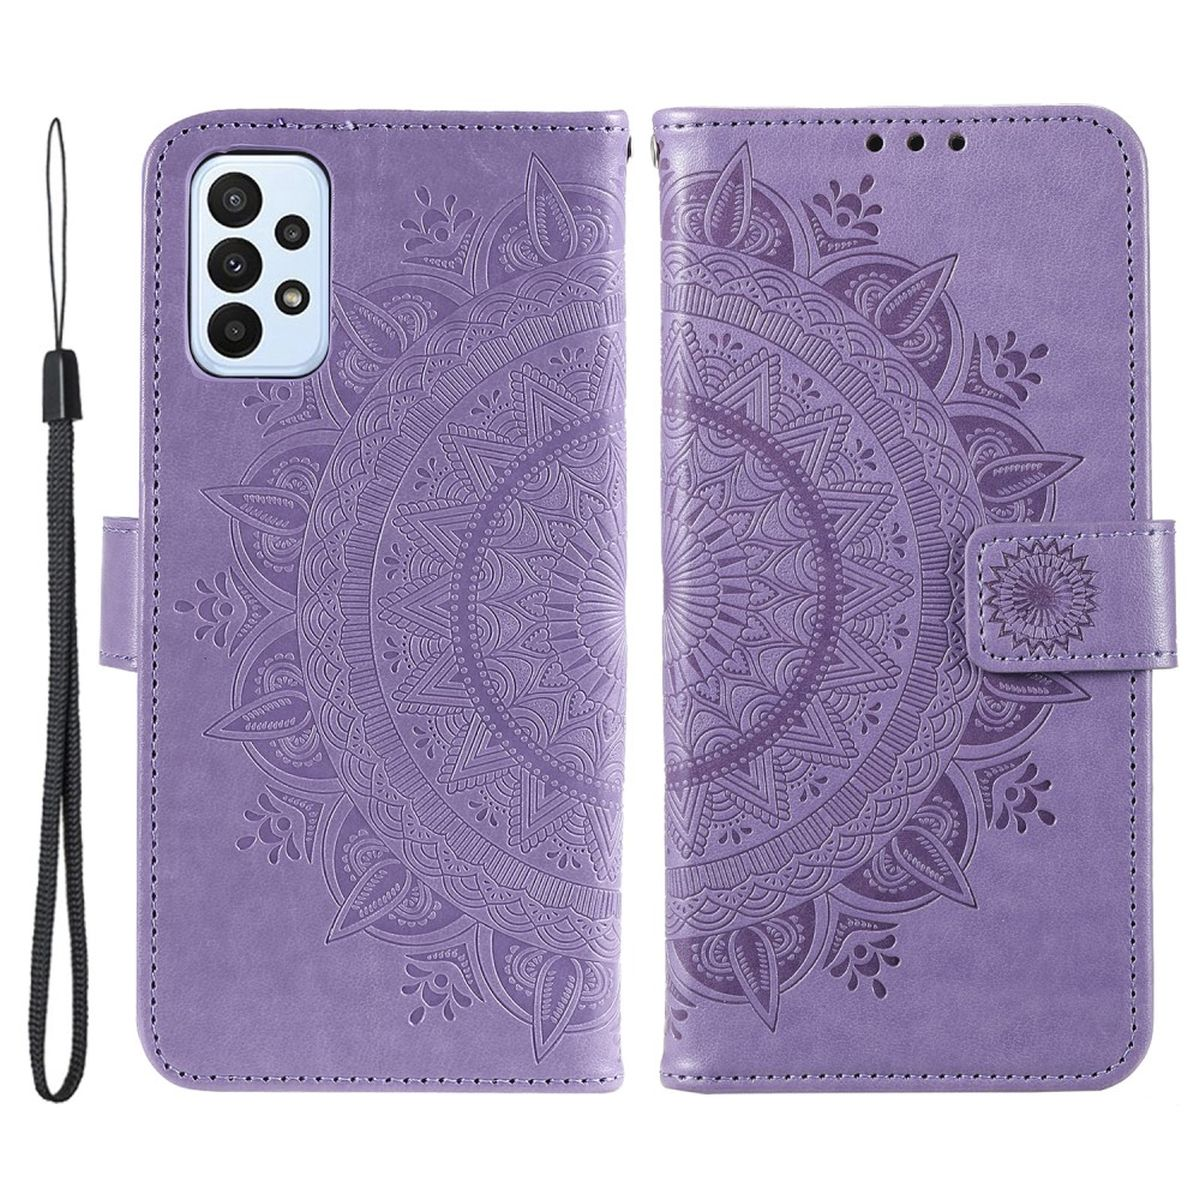 COVERKINGZ Klapphülle mit A23, Lila Bookcover, Samsung, Mandala Muster, Galaxy